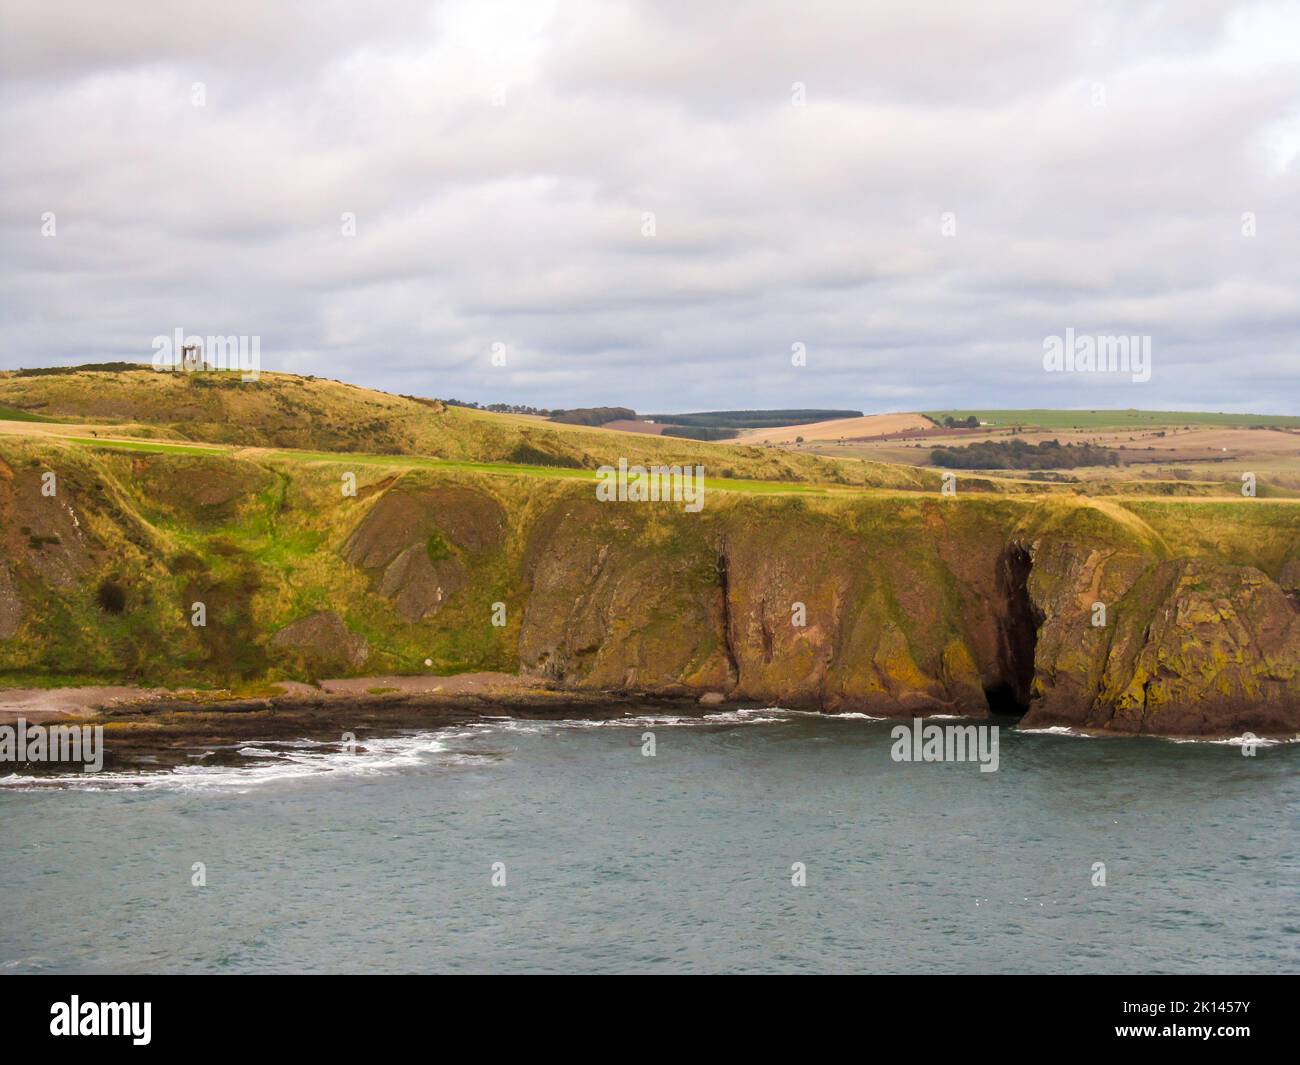 The steep basalt cliffs of the northern Scottish coastline, with a memorial on the Horizon, Stock Photo